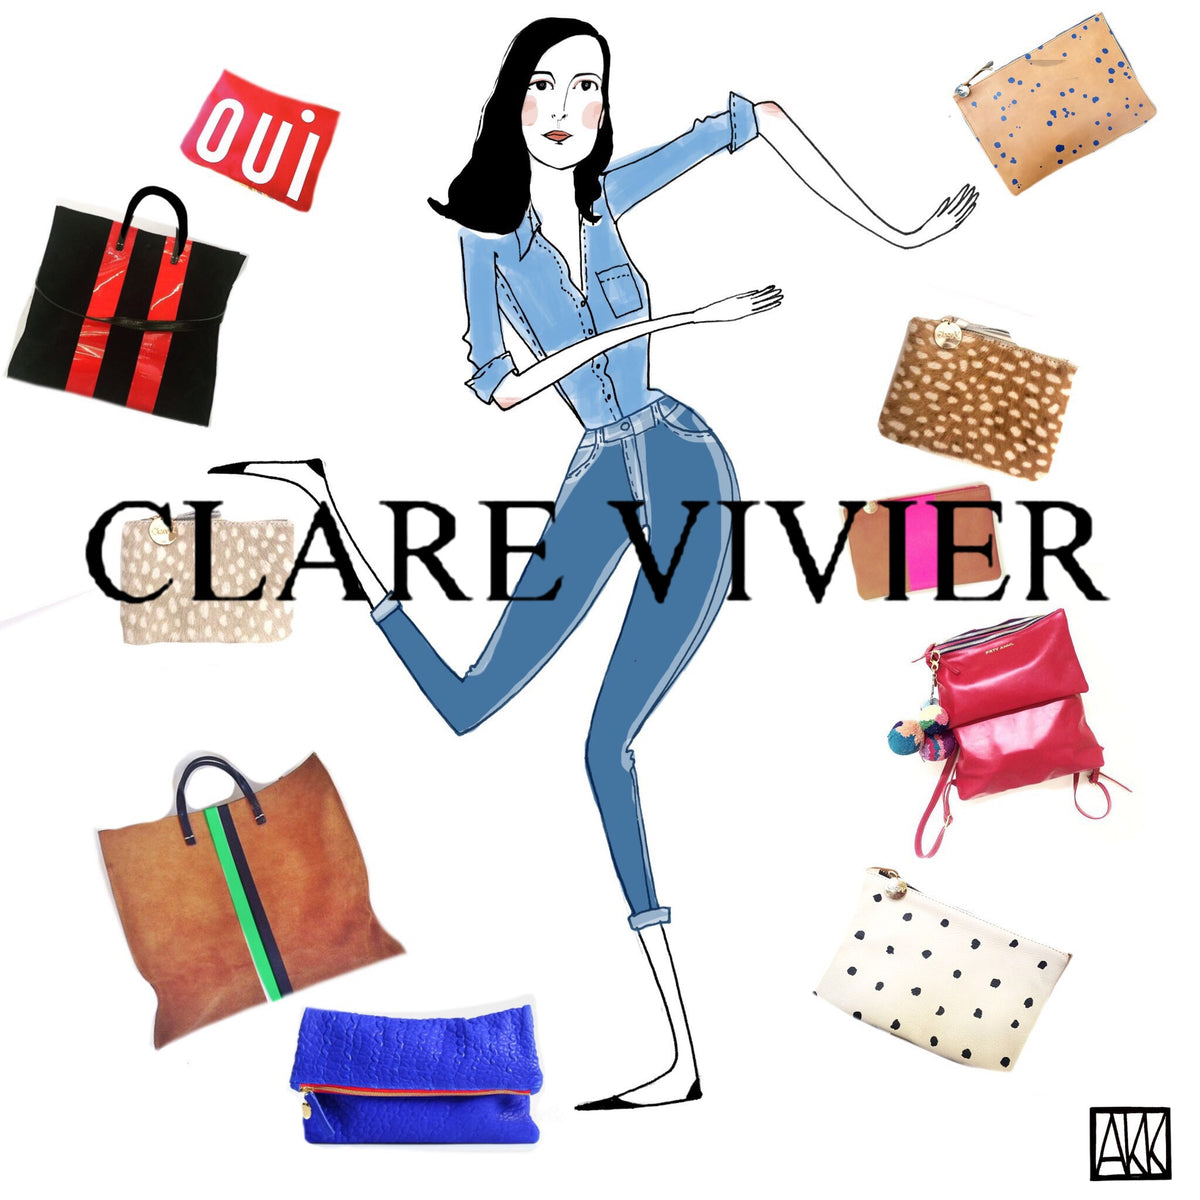 Who What Wear Podcast: Clare Vivier